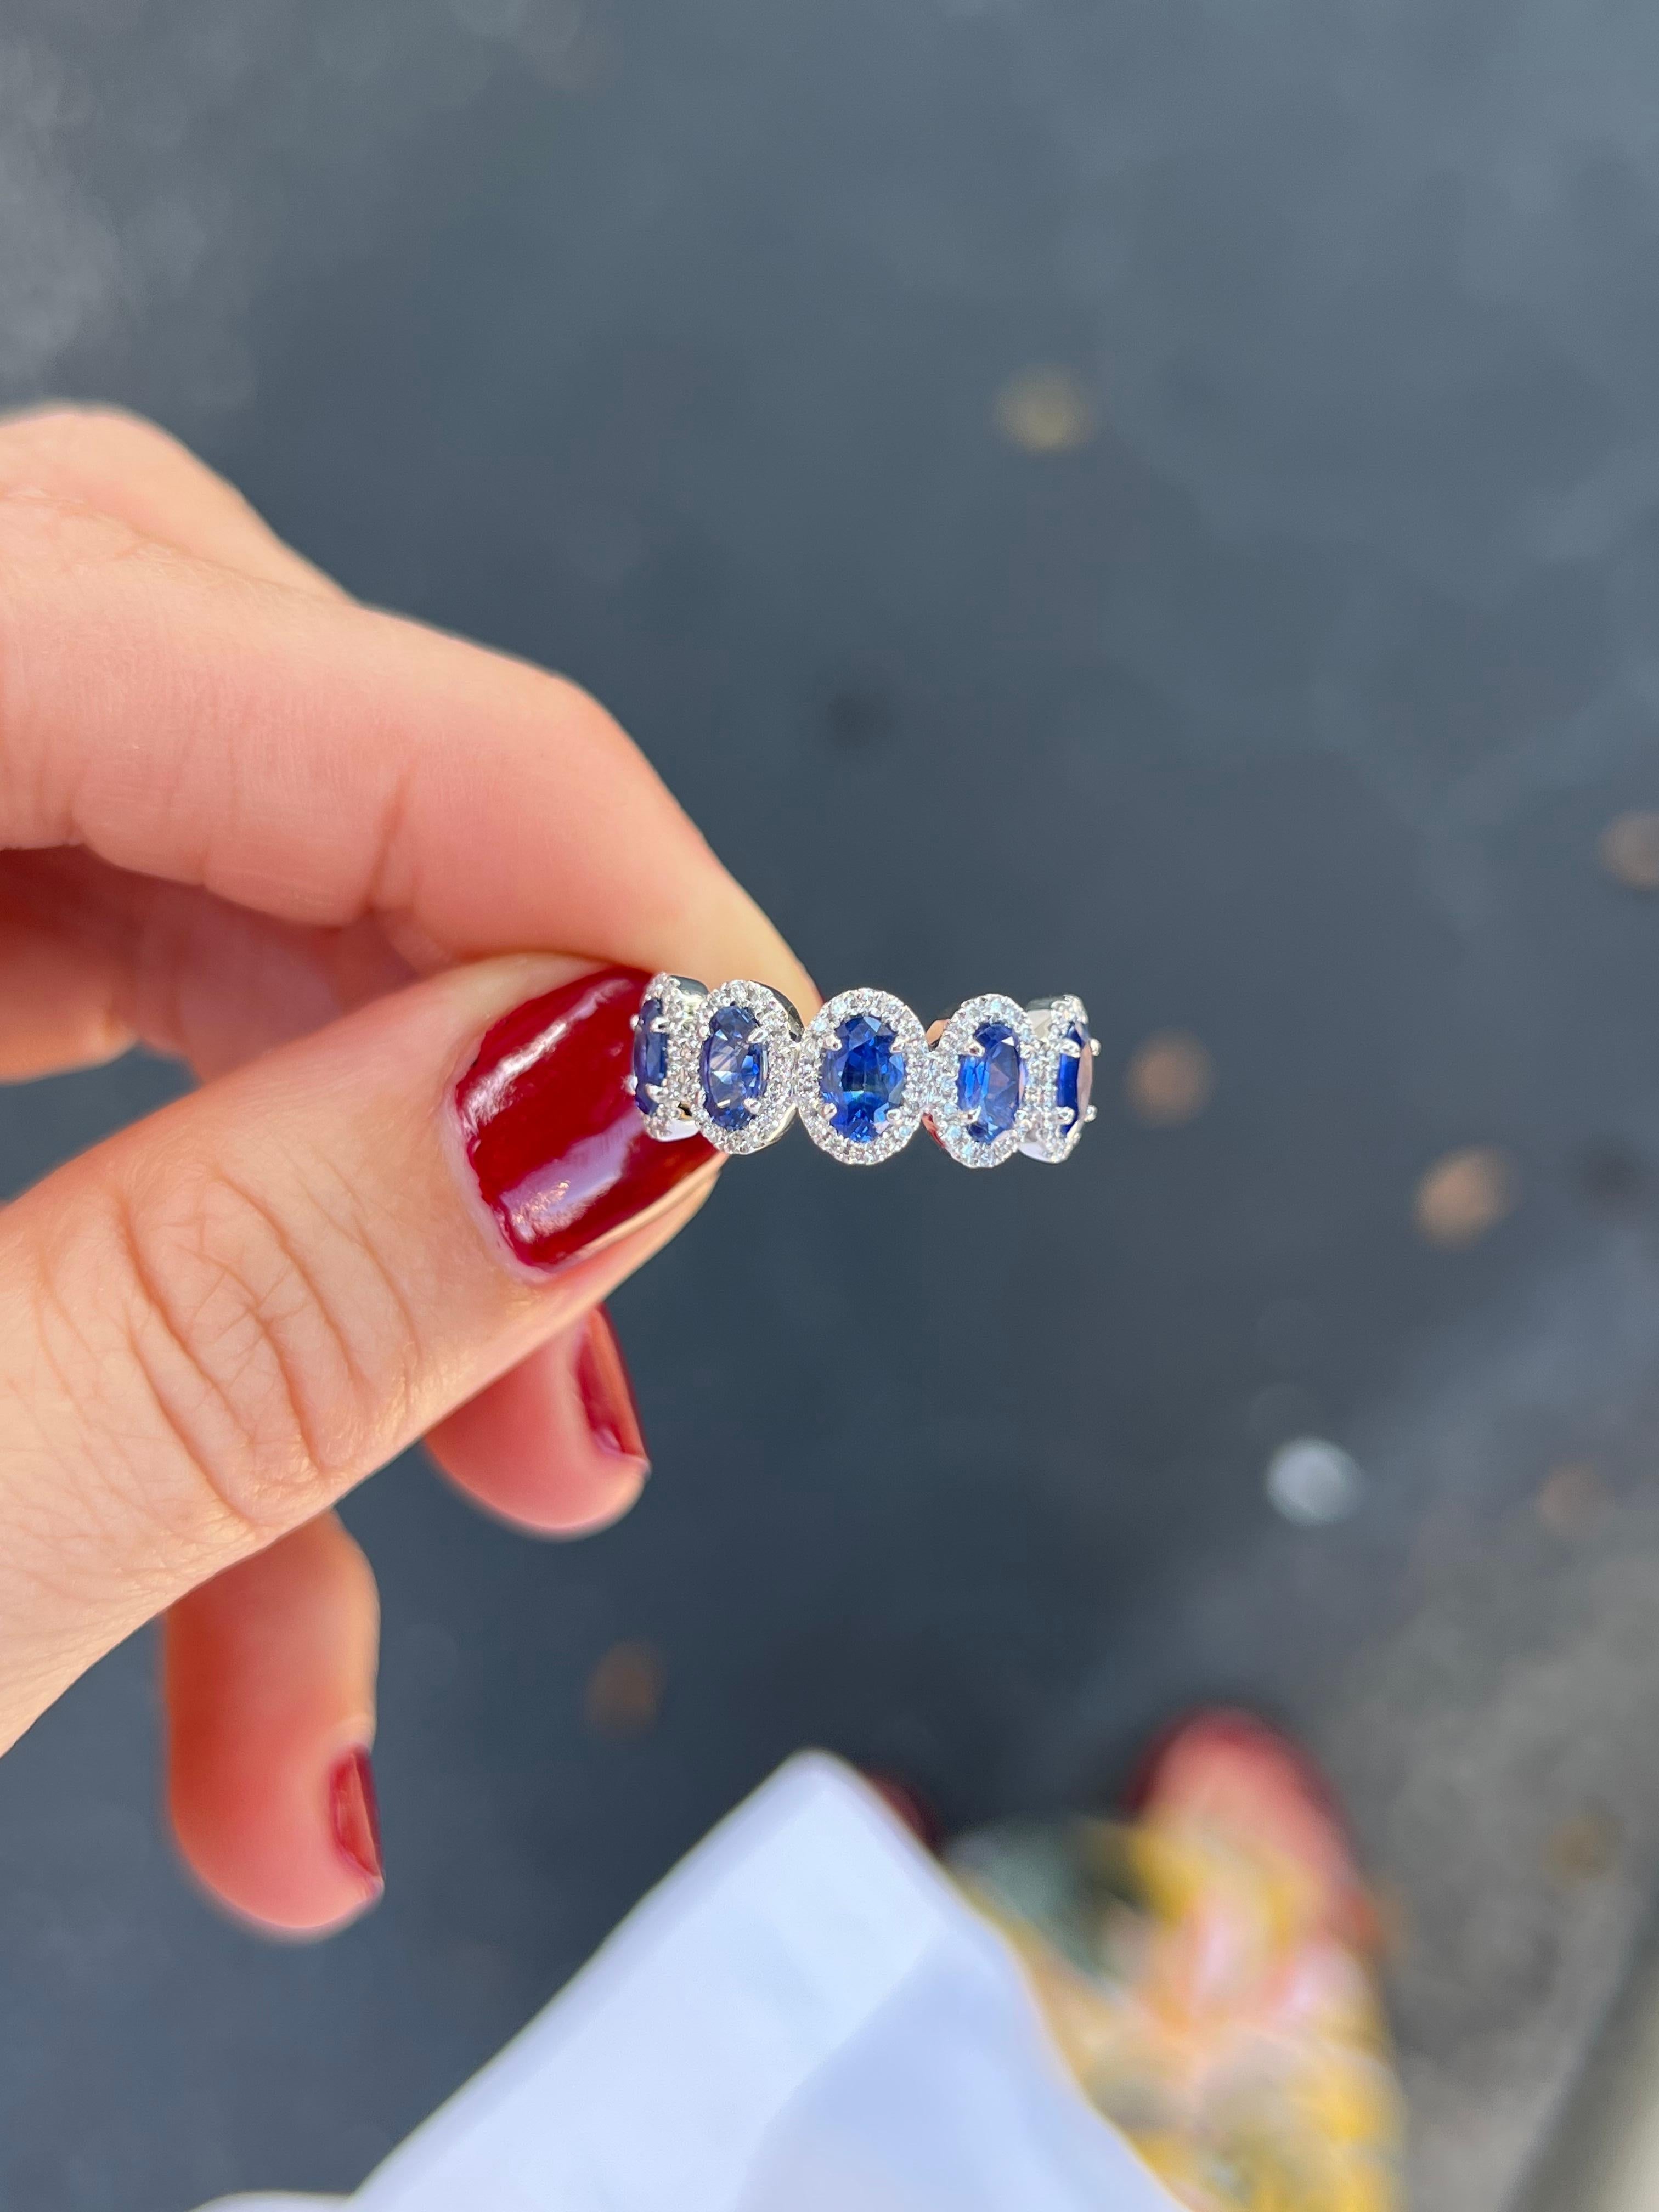 Platinum band with 2 carats total weight of oval sapphires and .27 carats in diamonds. 

Features
Platinum Mounting
5 oval sapphires for a combined 2 carats total weight in sapphires
.27 carat total weight in diamonds
Band width is 7.5 mm, tapering